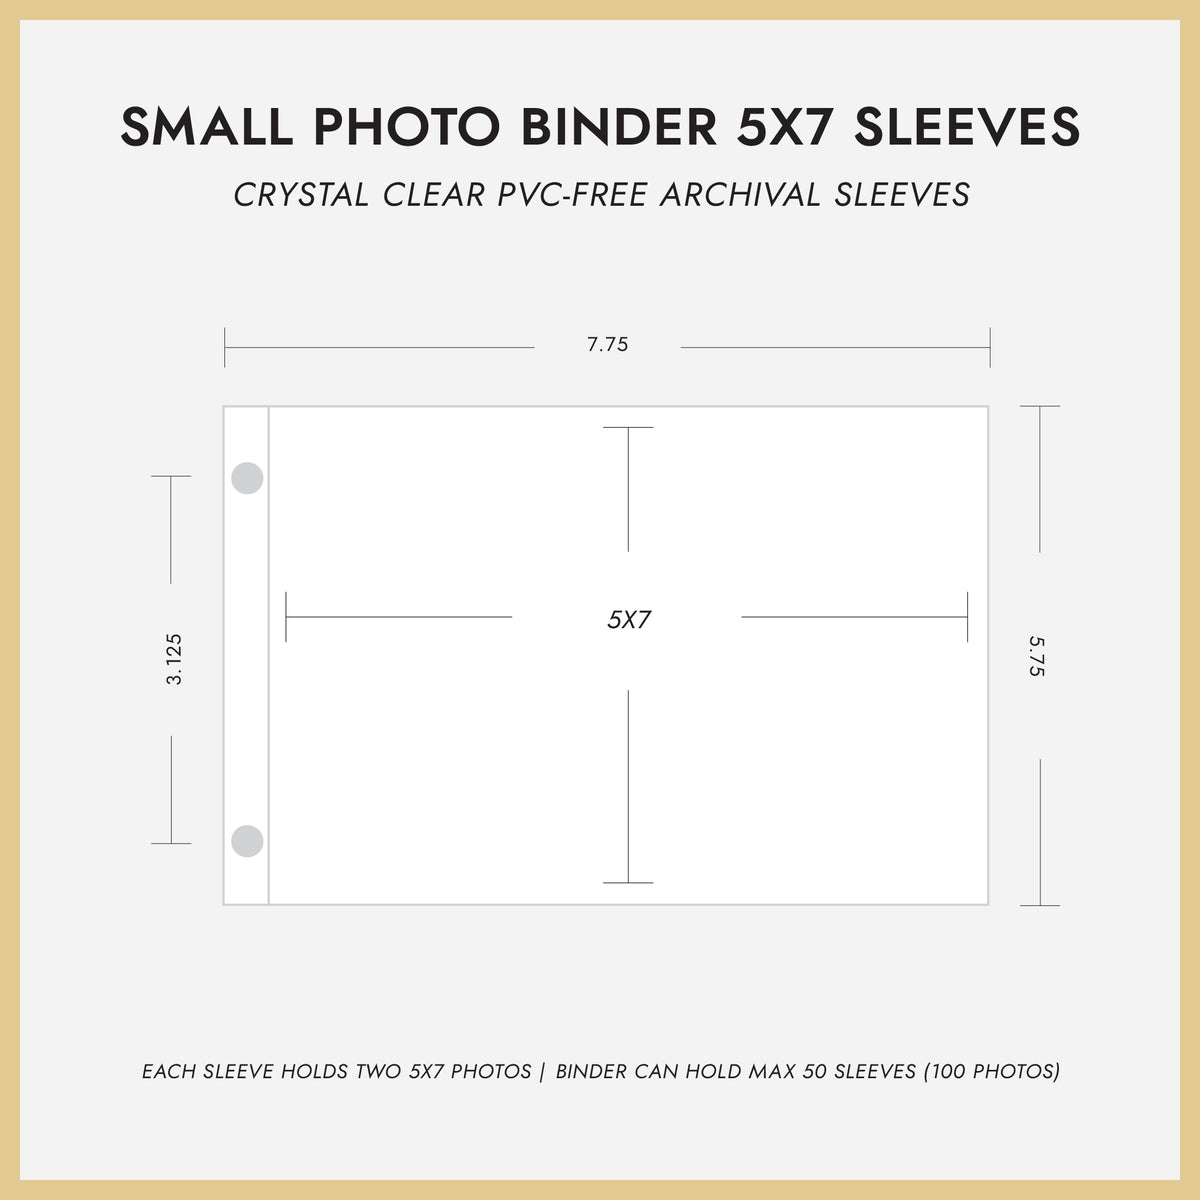 Small Photo Binder | for 5x7 Photos | with Slate Vegan Leather Cover